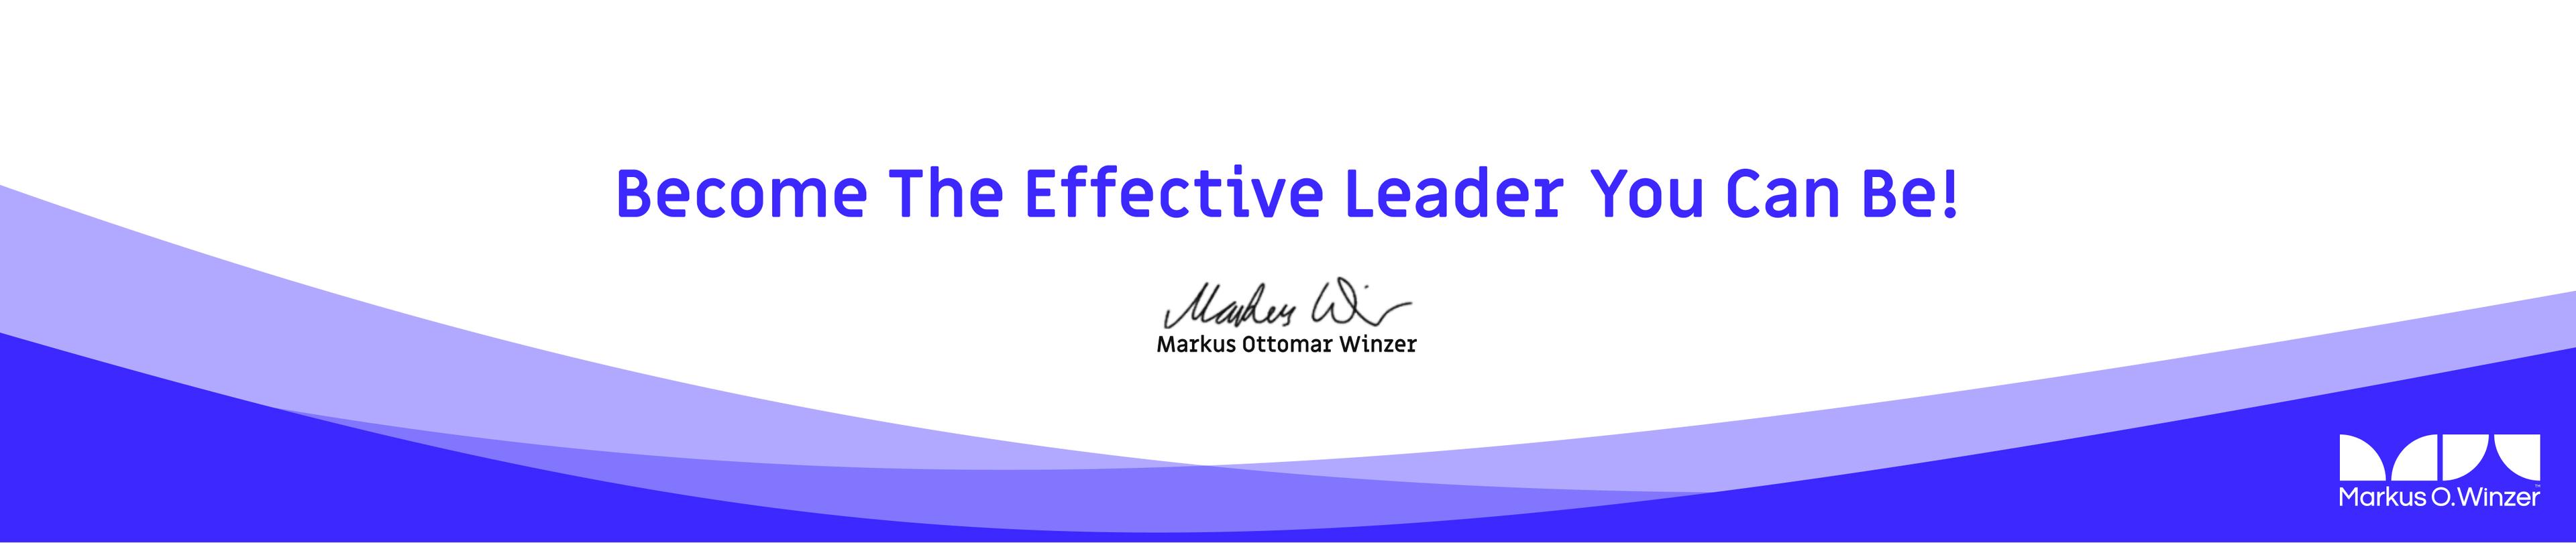 Markus O. Winzer - Empowering You To Be Your Best | Leadership, Results and Effectiveness Coach | Being Profile® Accredited Practitioner & Facilitator